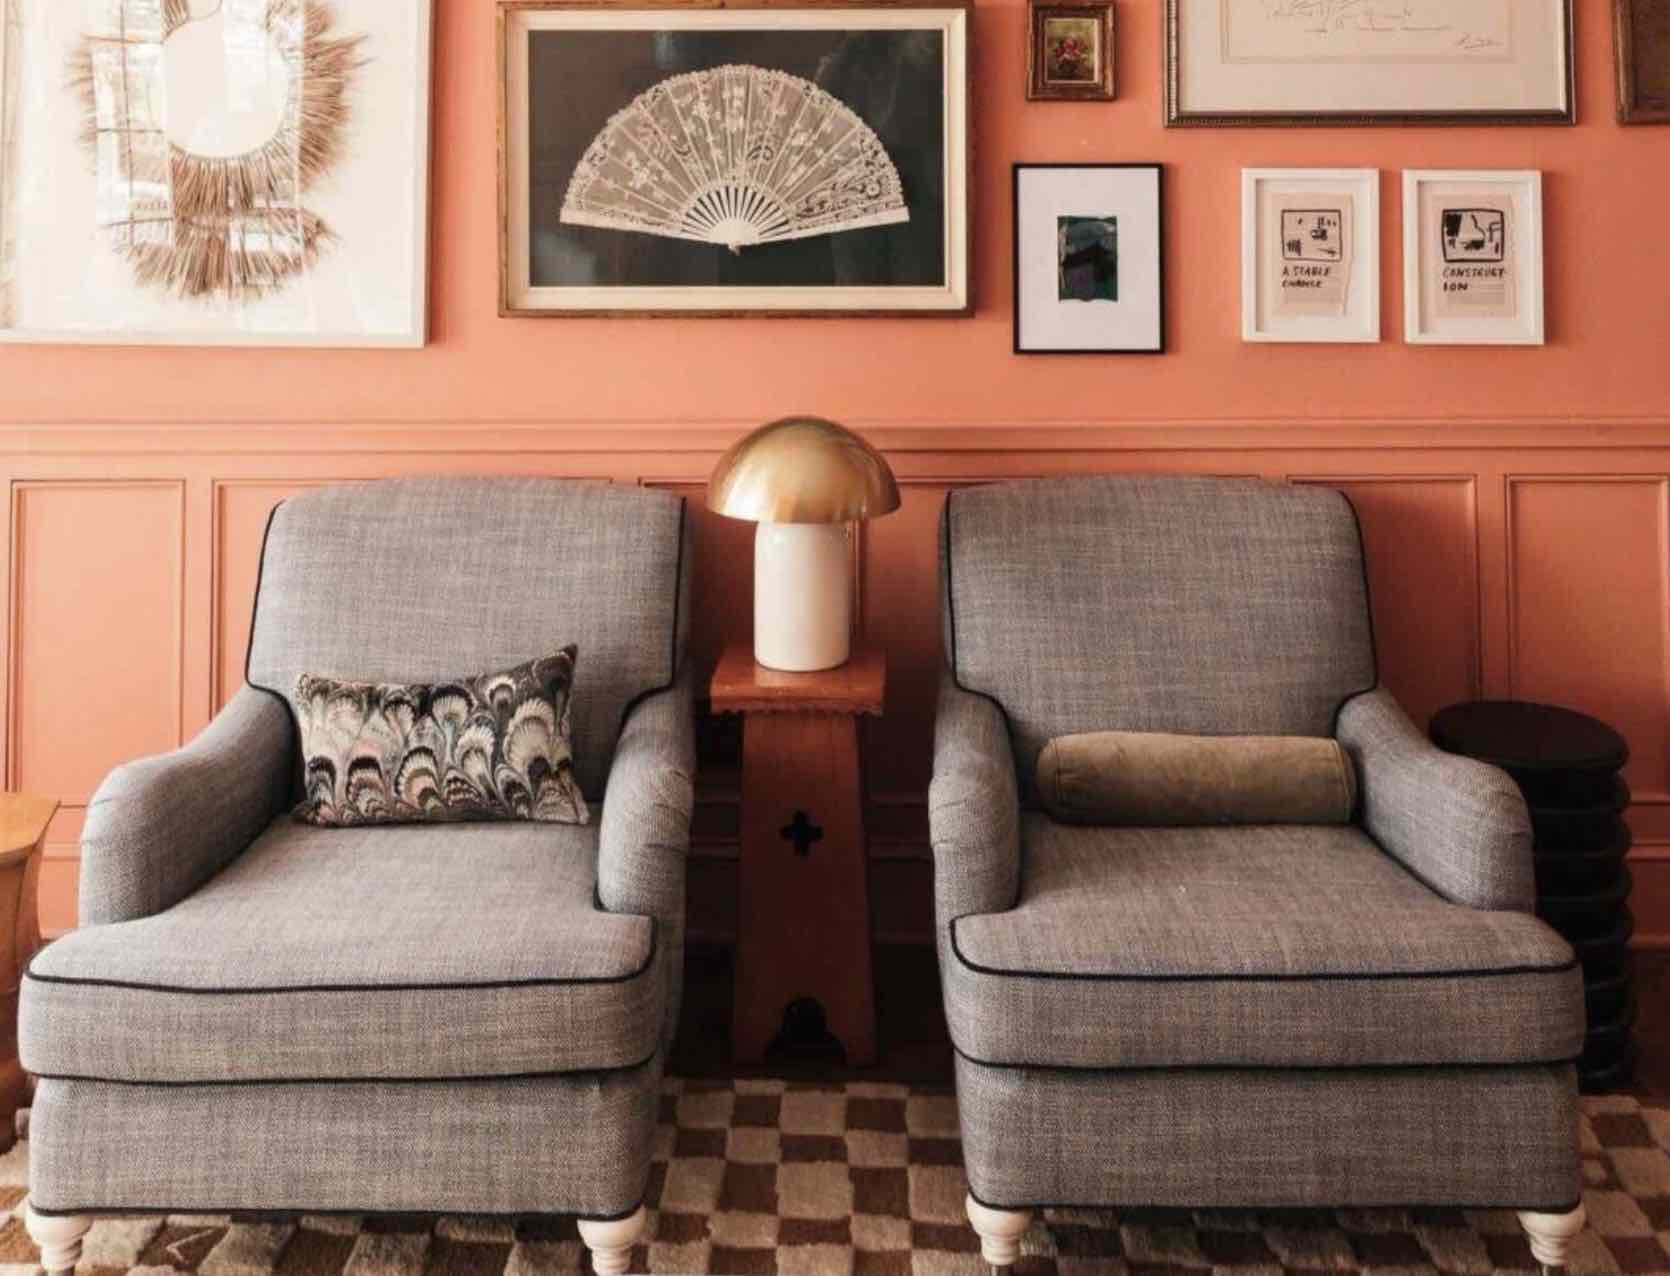 5 Interior Design Elements All of My Favorite Rooms Have in Common | Wit & Delight